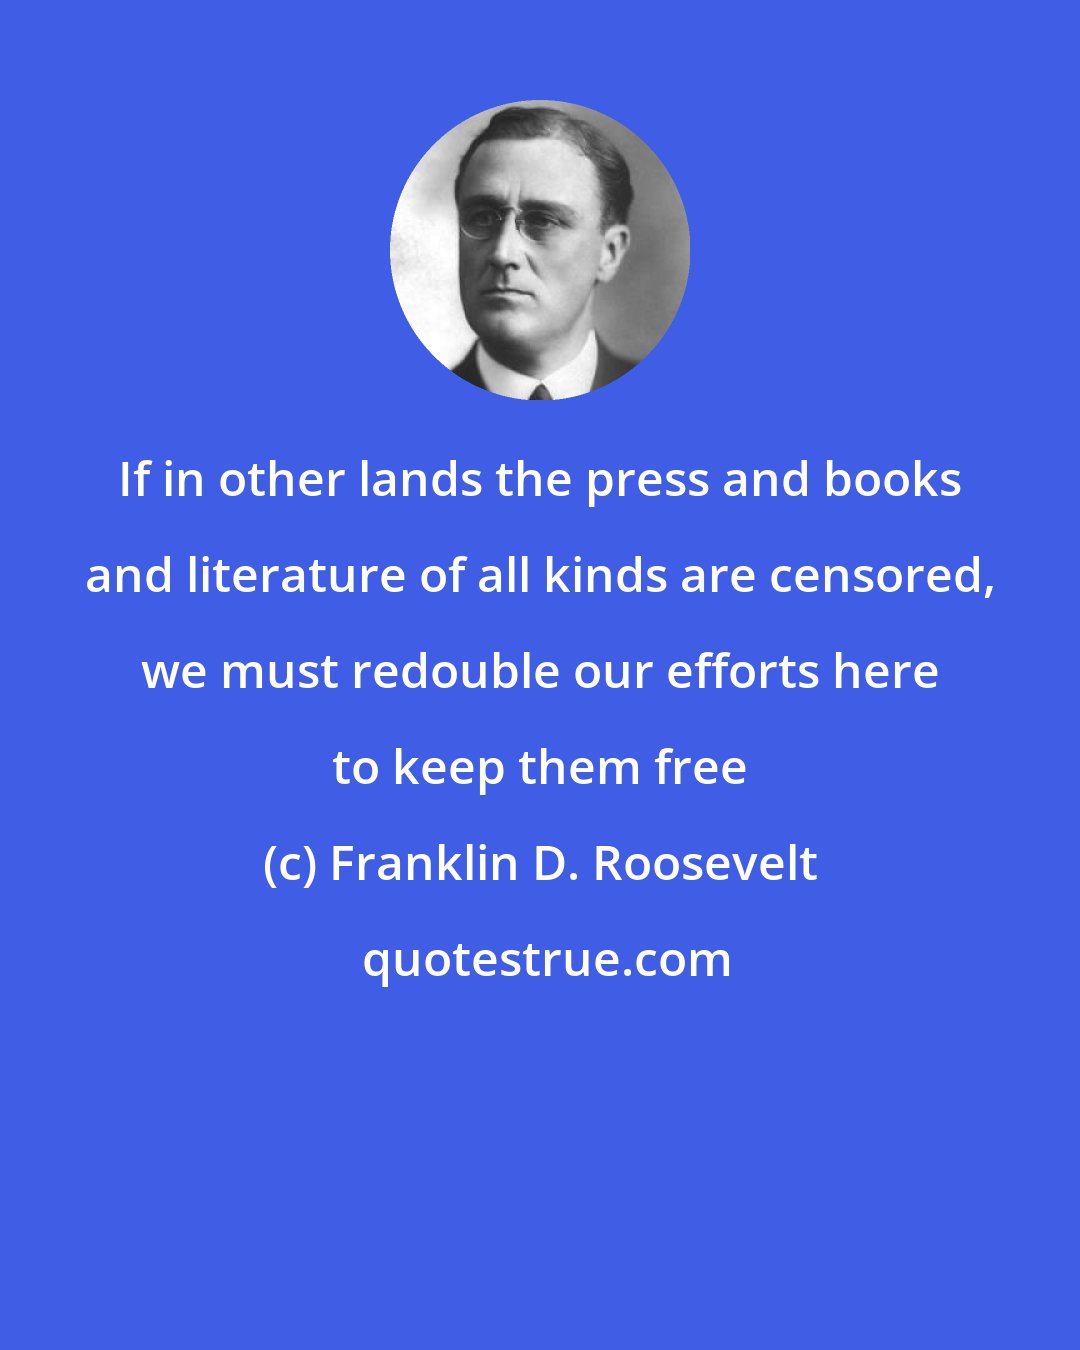 Franklin D. Roosevelt: If in other lands the press and books and literature of all kinds are censored, we must redouble our efforts here to keep them free